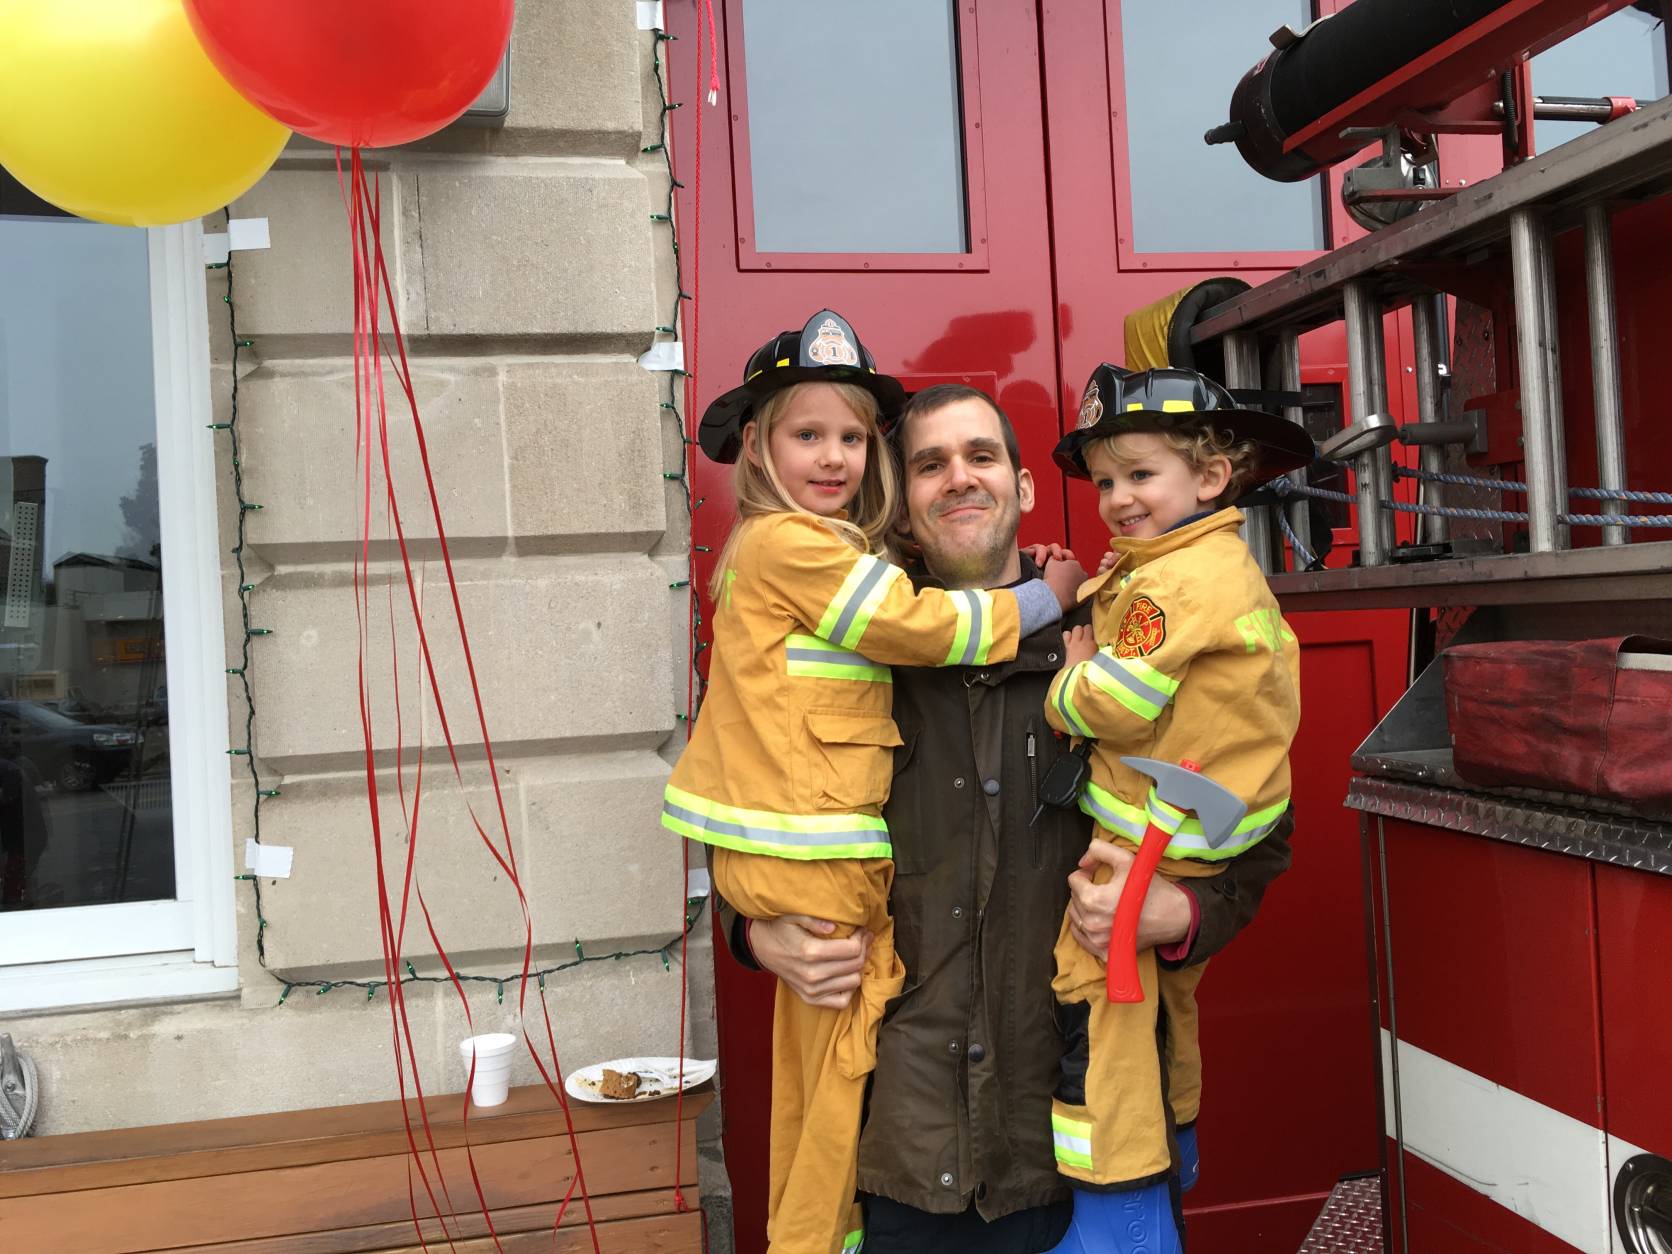 Community members brought their children to enjoy the festivities--some dressed up like firefighters.(WTOP/Liz Anderson)